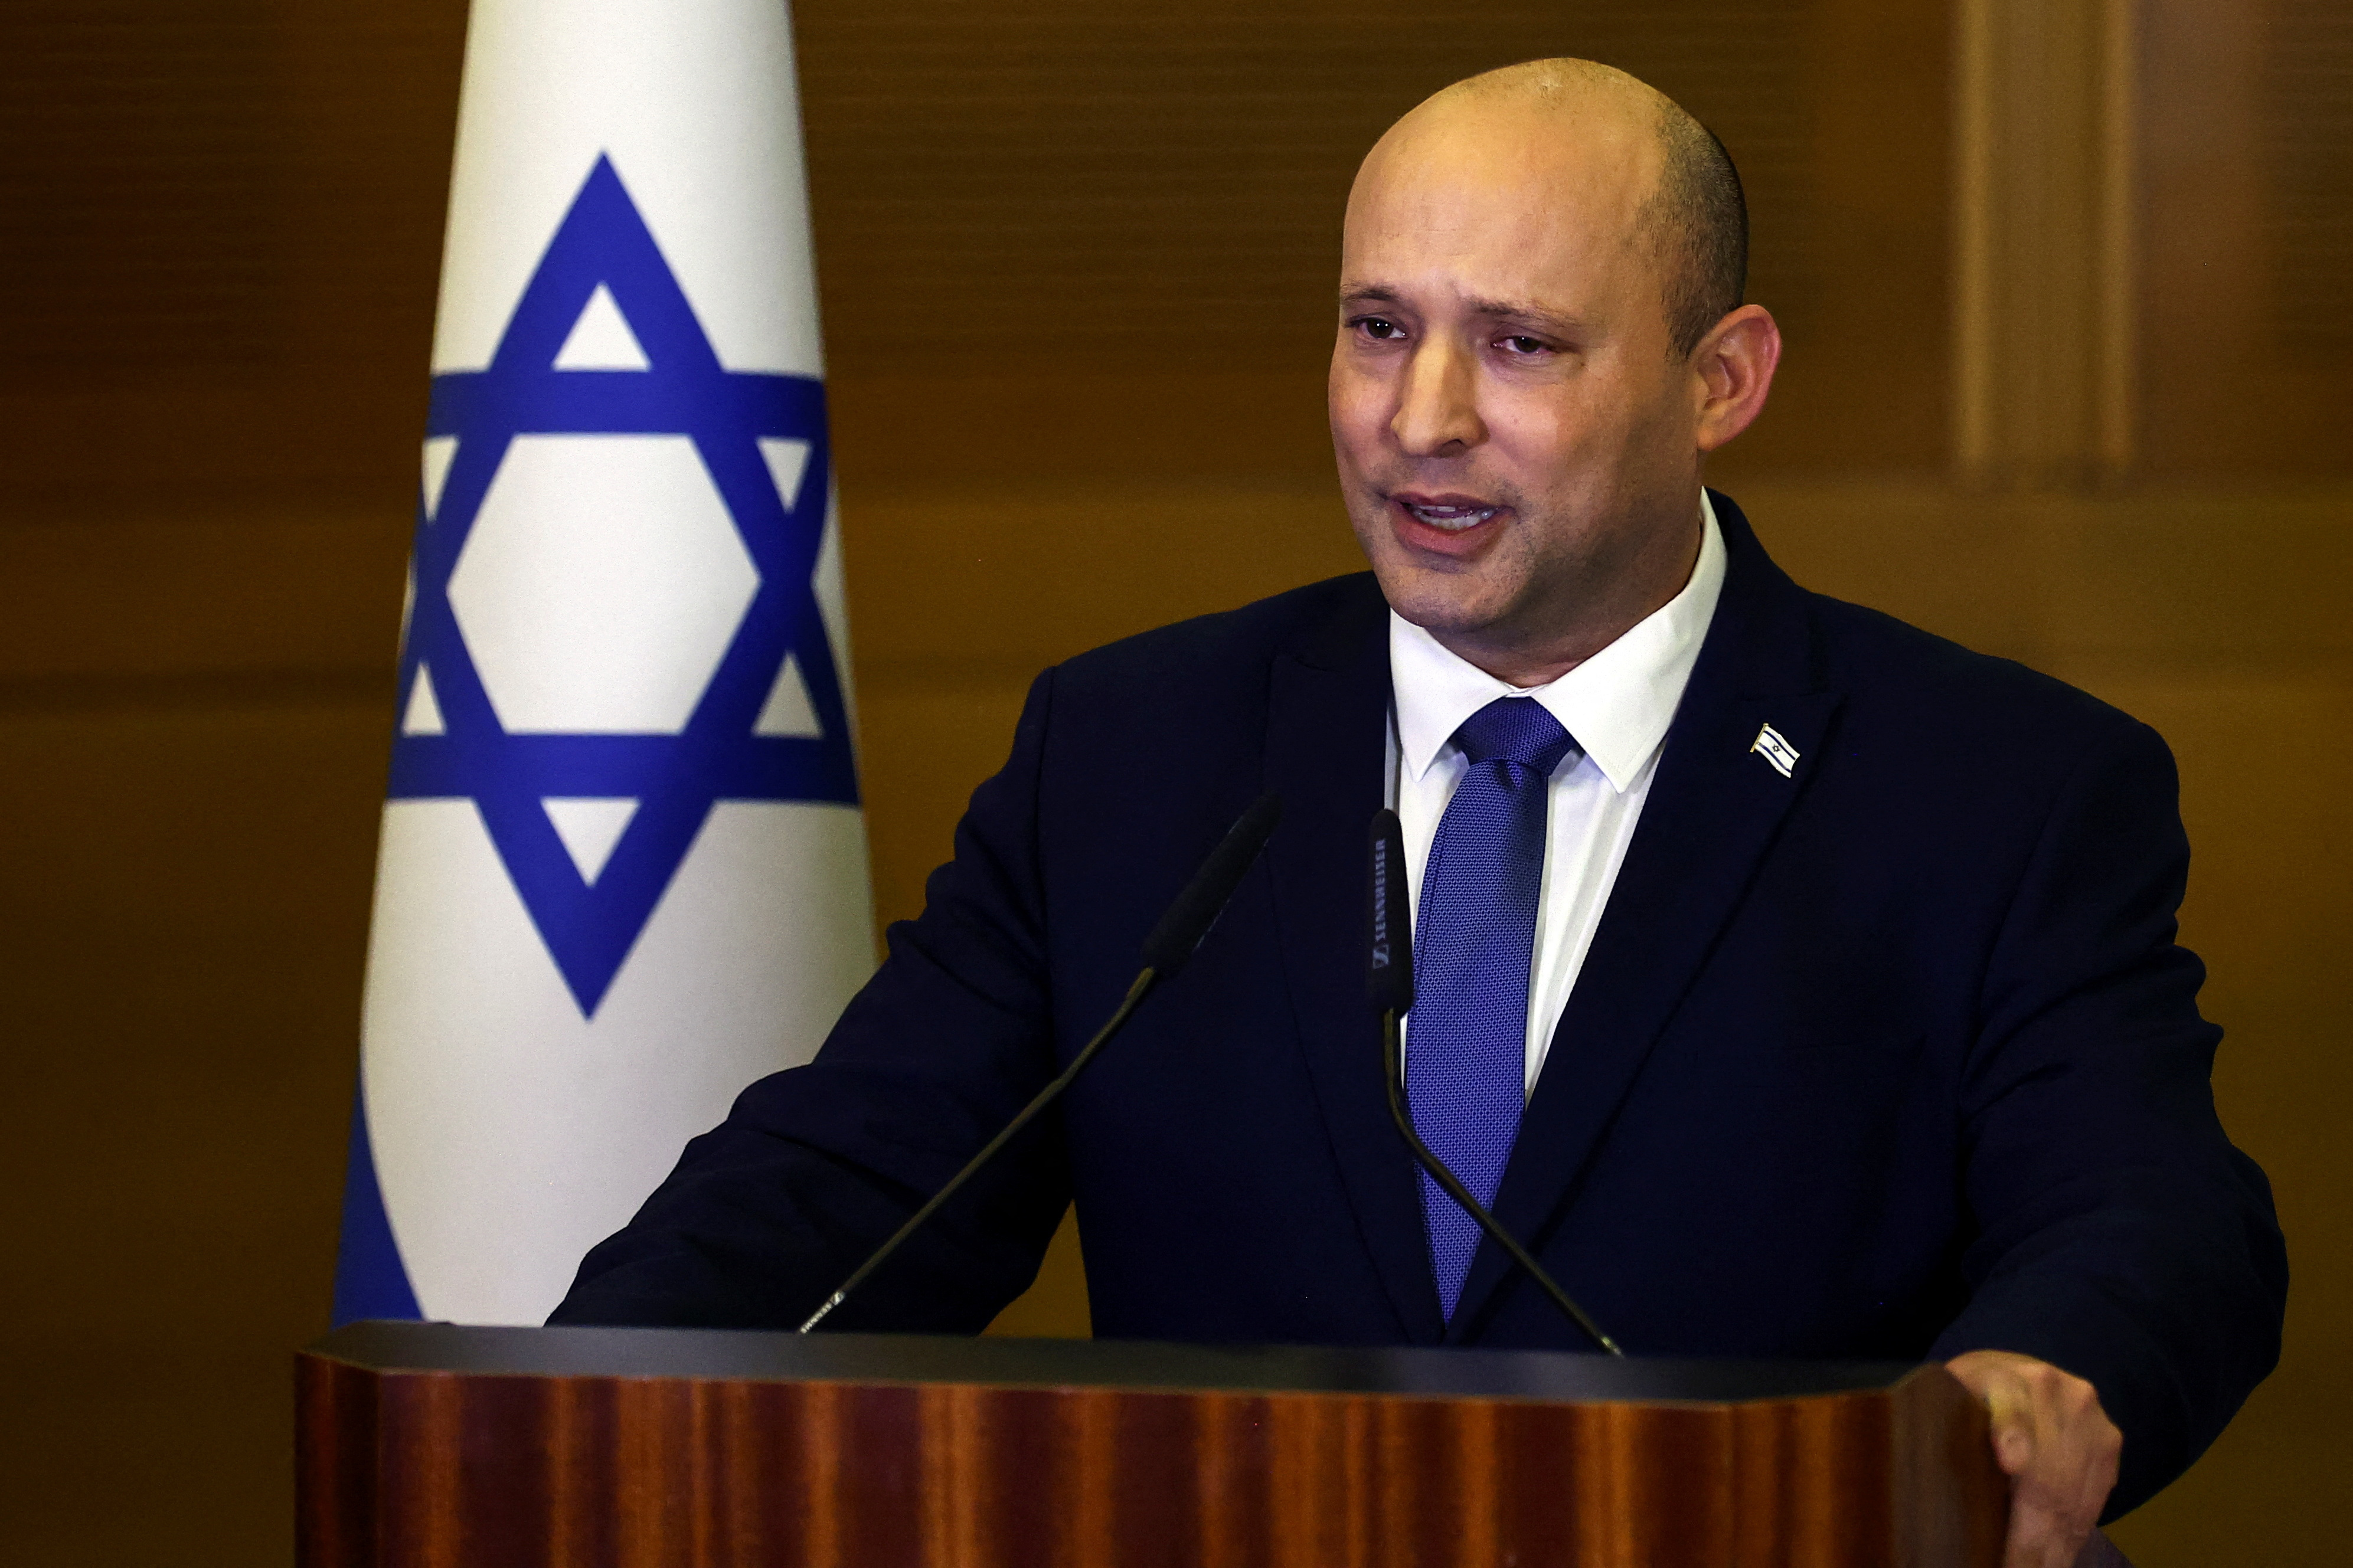 Israeli Prime Minister Naftali Bennett delivers a statement to the media, telling reporters he will not be running in Israel’s next election, at the Knesset, the Israeli Parliament, in Jerusalem